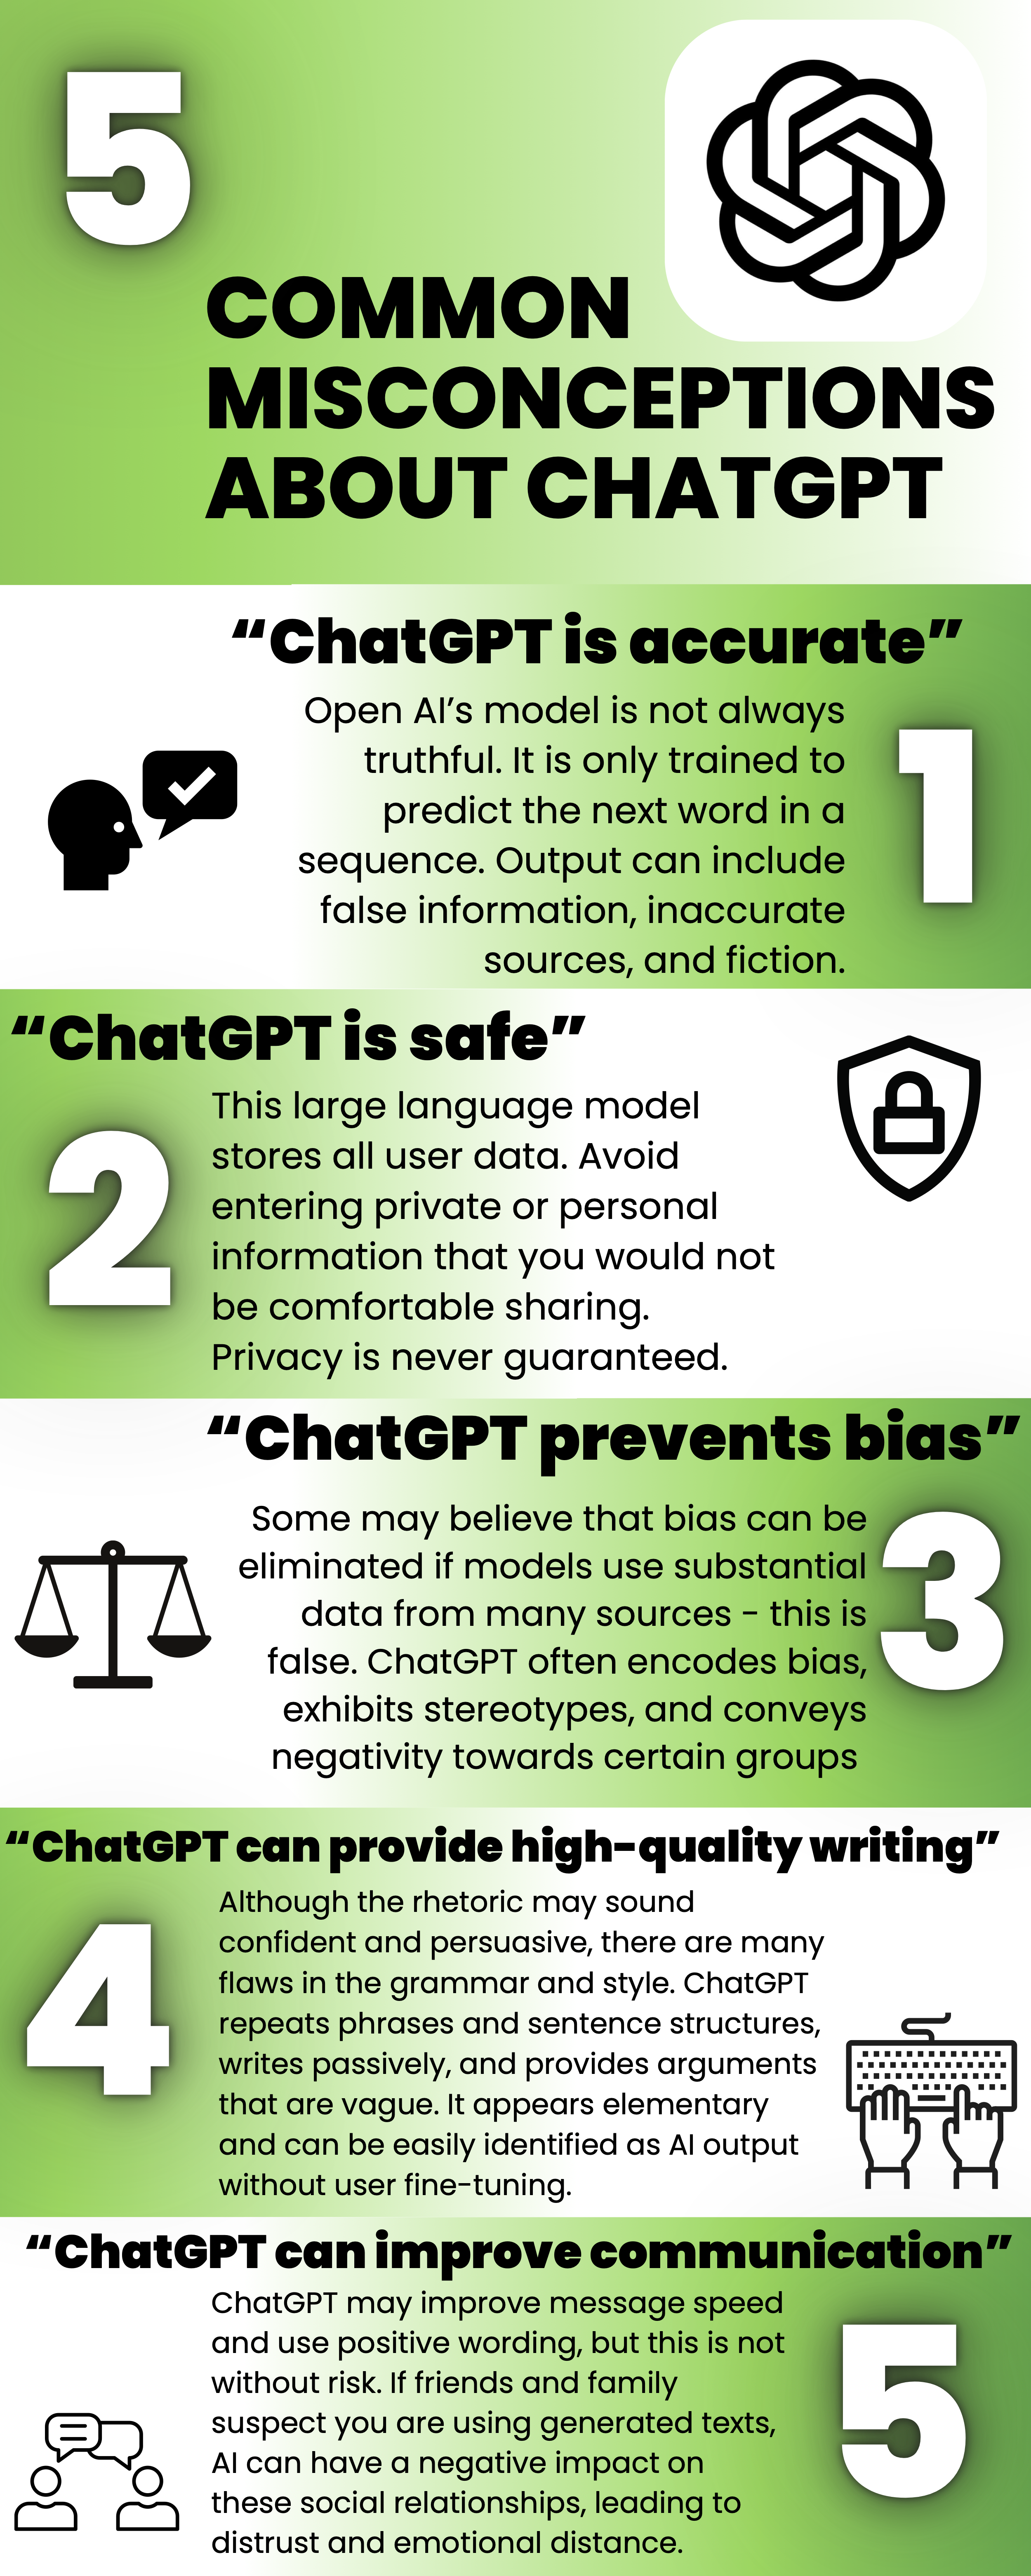 Misconceptions about chatGPT Infographic